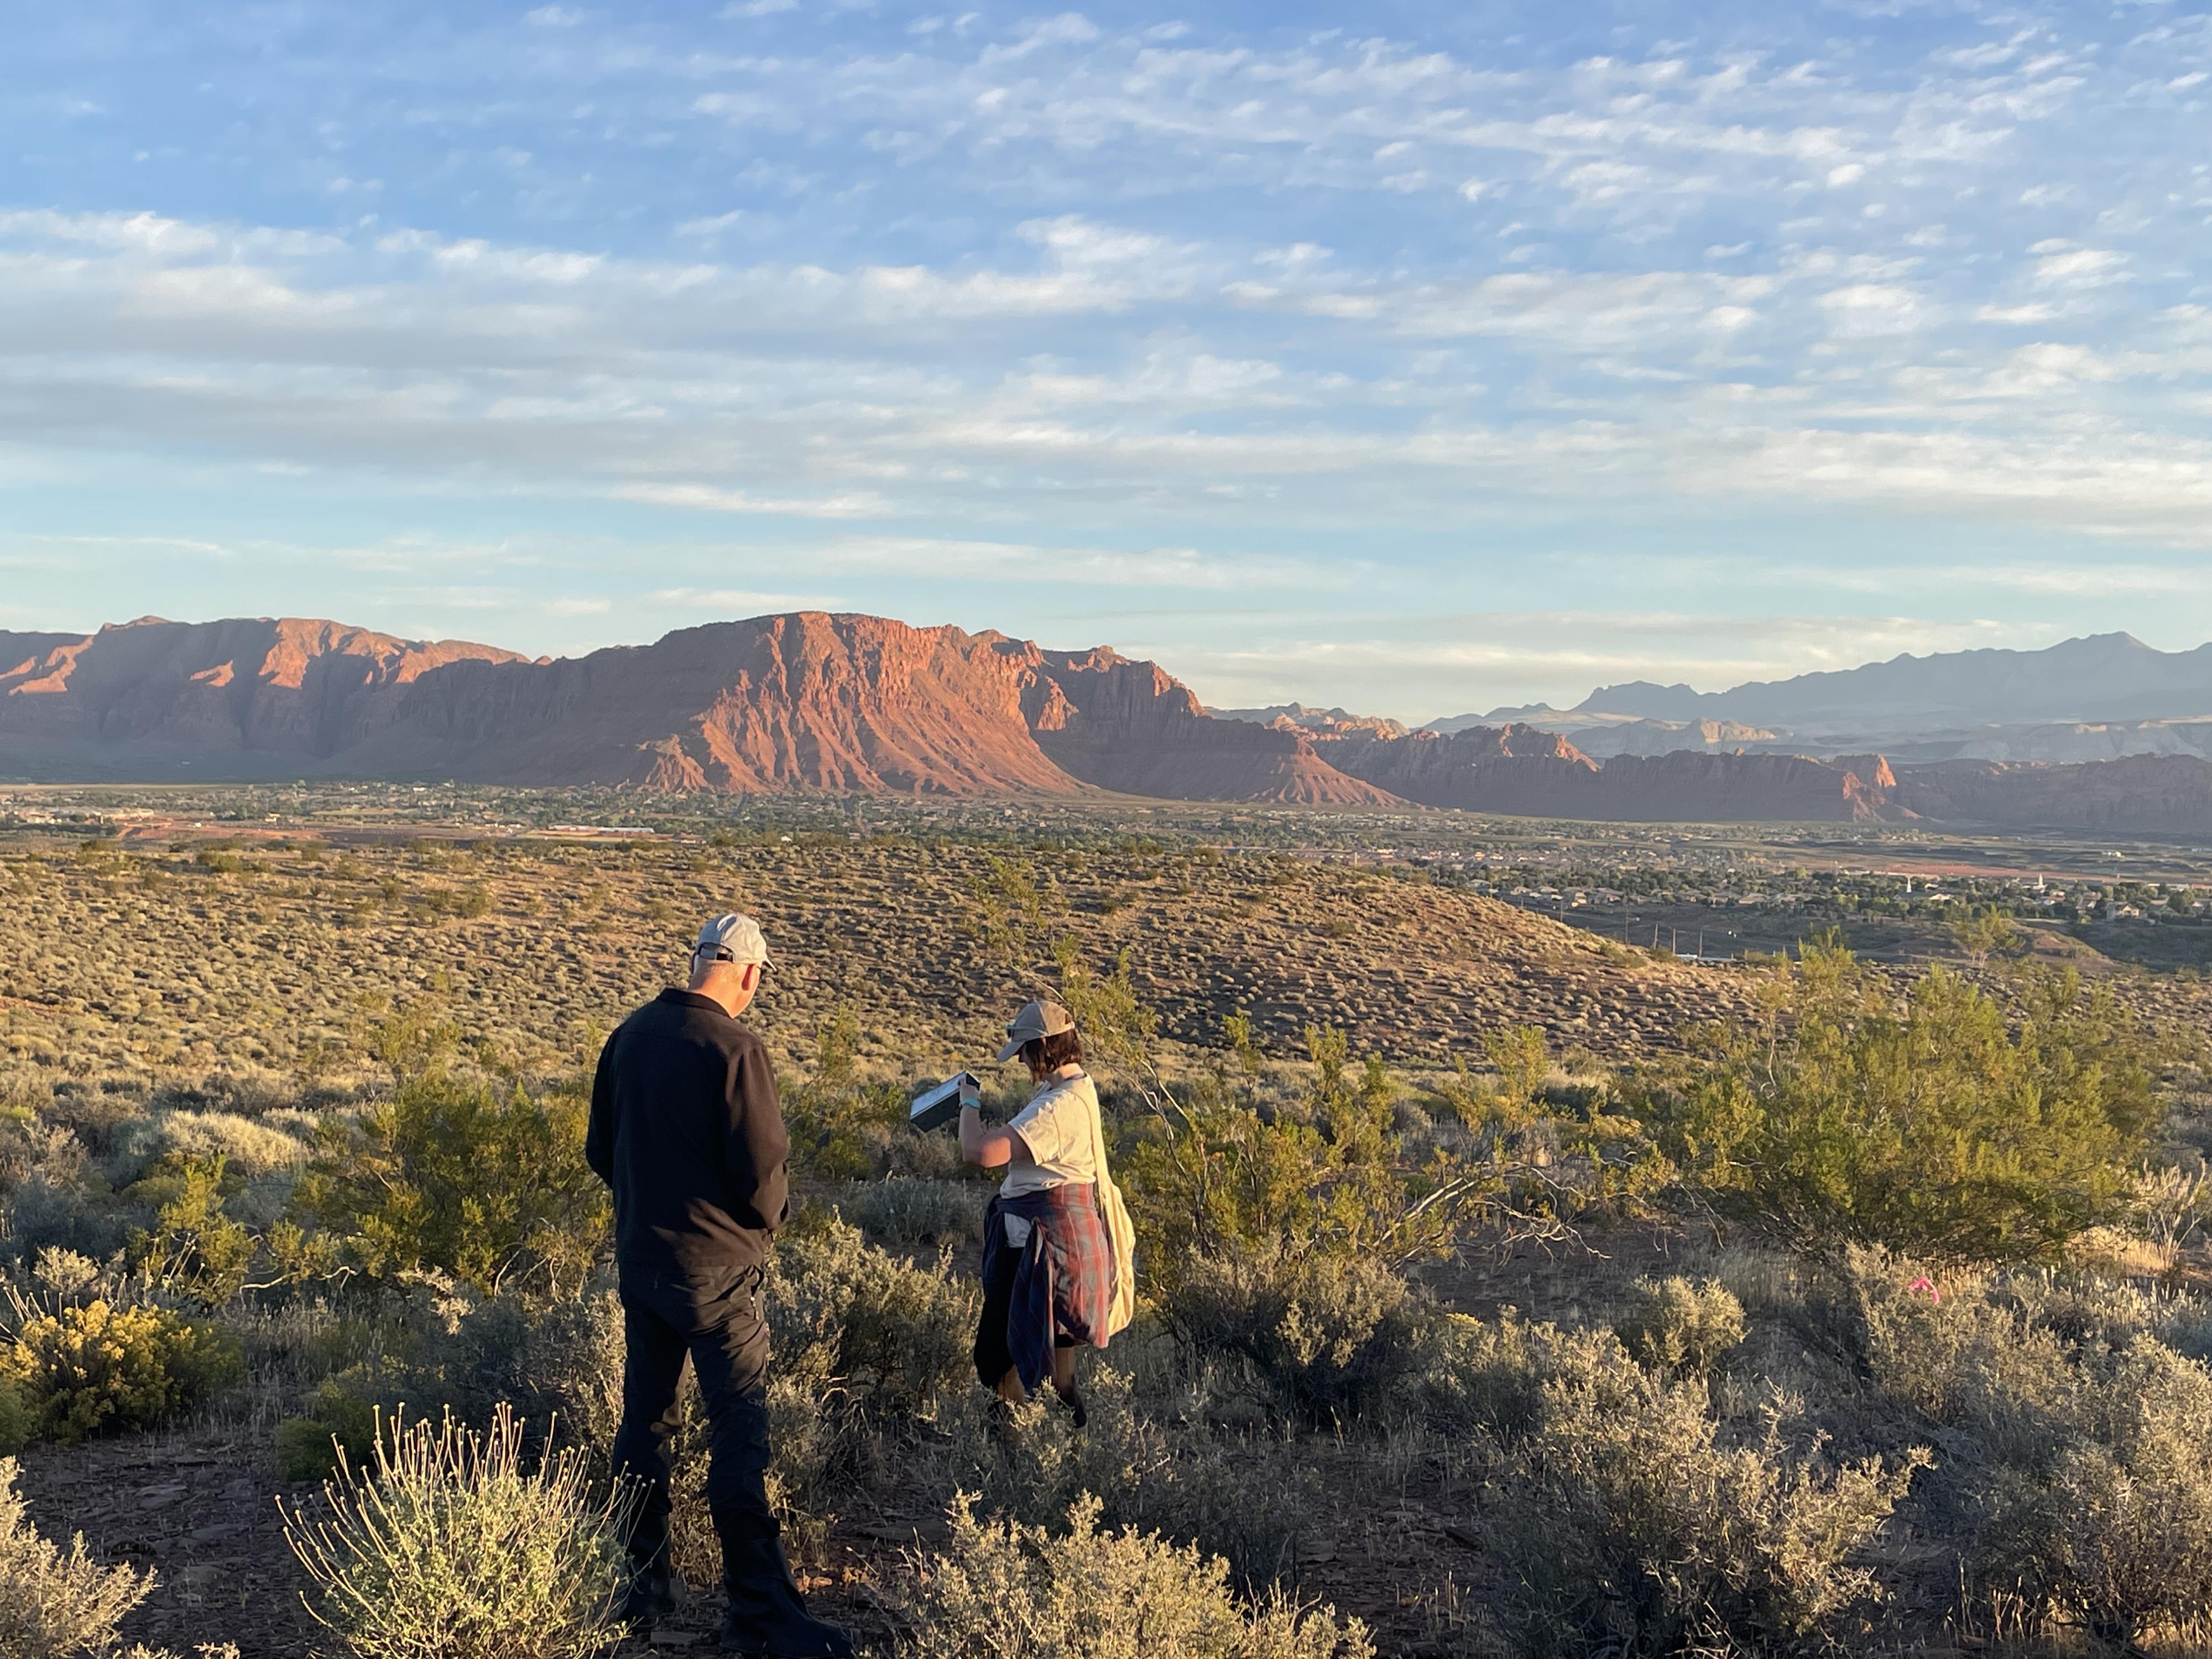 Two figures stand in a vast, scrub-covered flatland with huge mesas and mountains in the blue distance